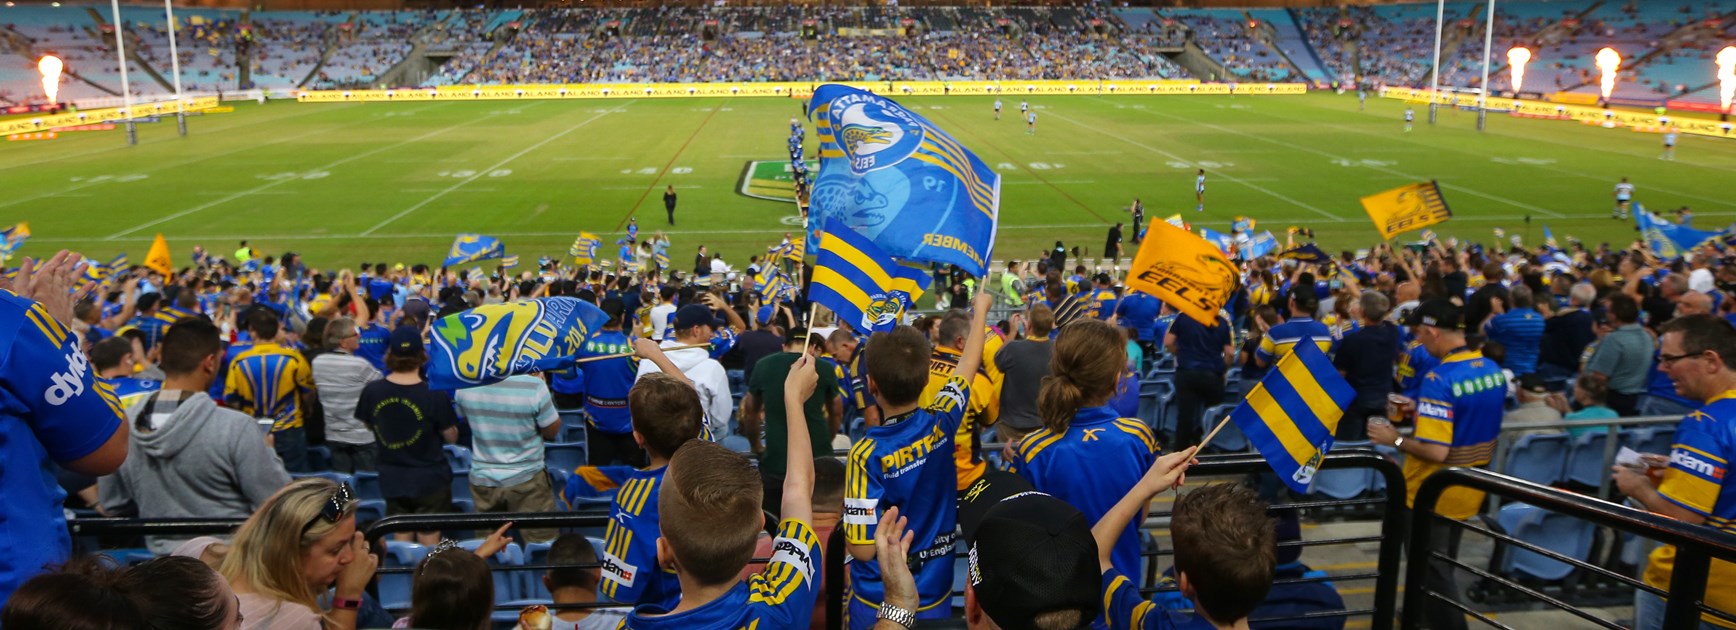 Game Day Info: Eels v Sharks, ANZ Stadium - Johnny Mannah Cup